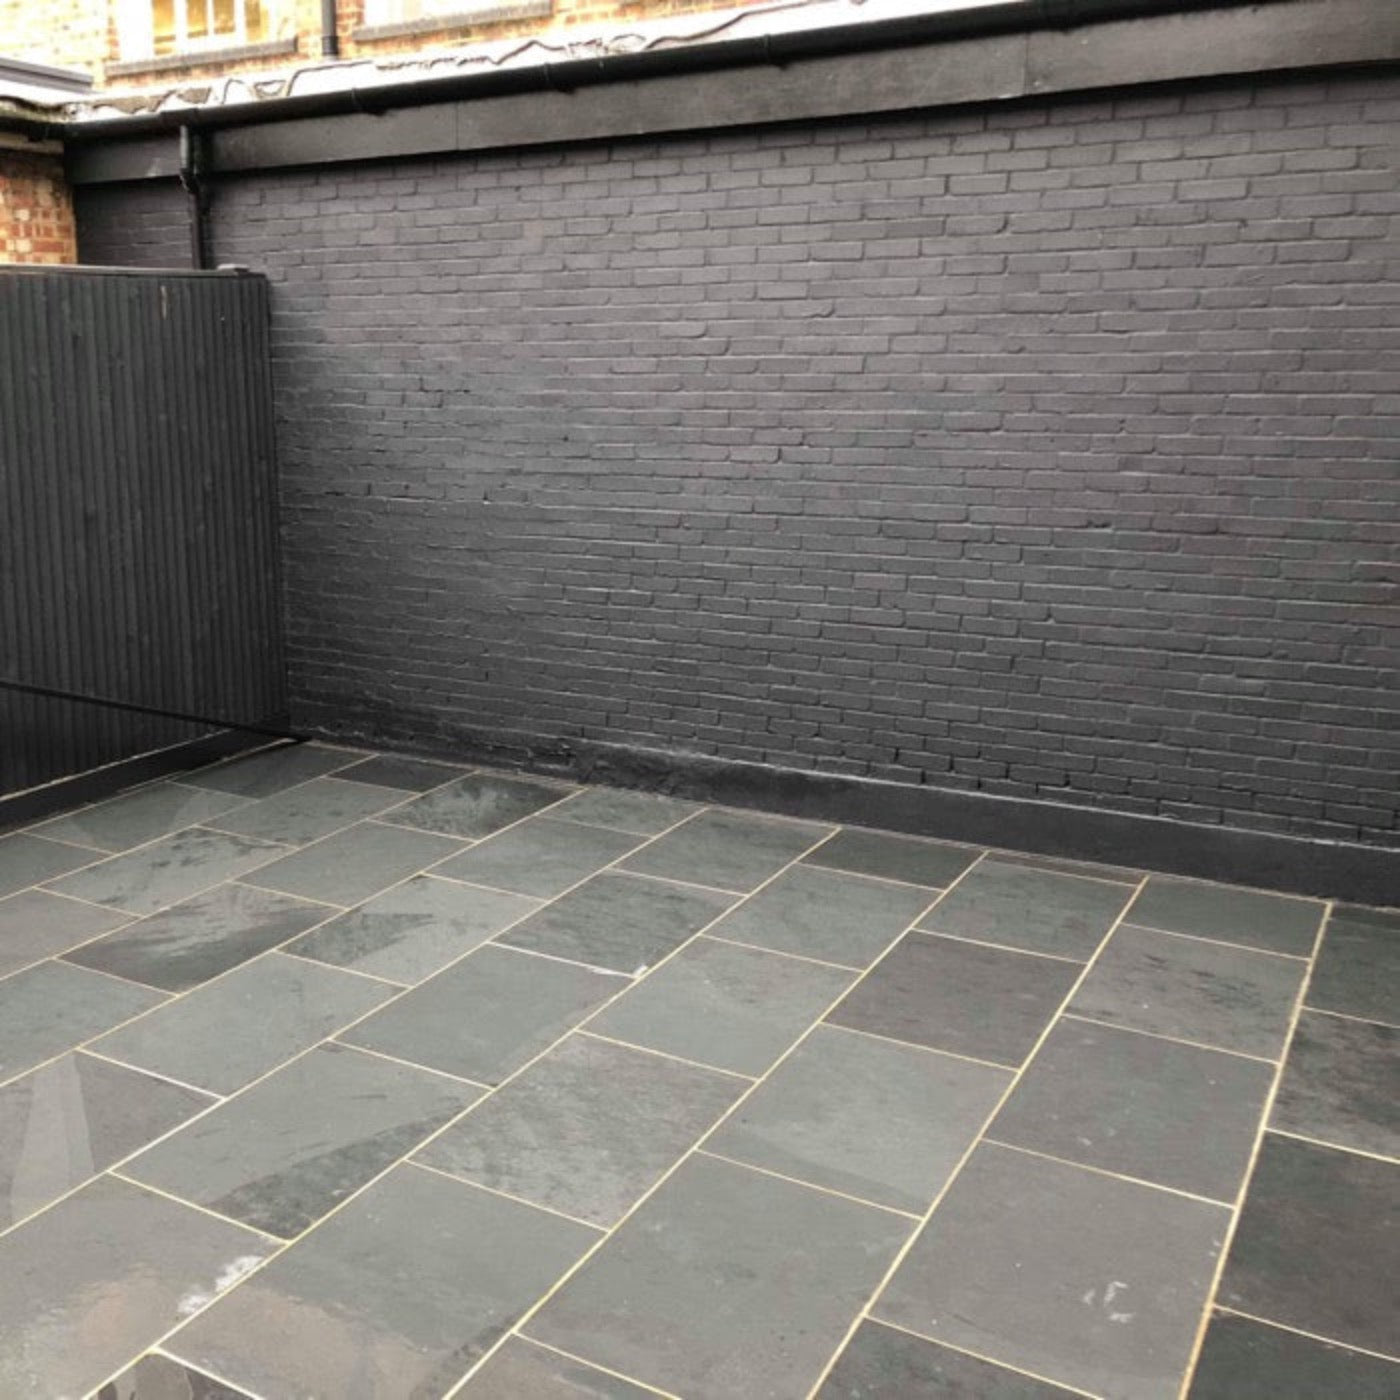 Black Slate Paving Slabs | 800 x 400 x 20 mm | As low as £33.46/m2 | Delivered